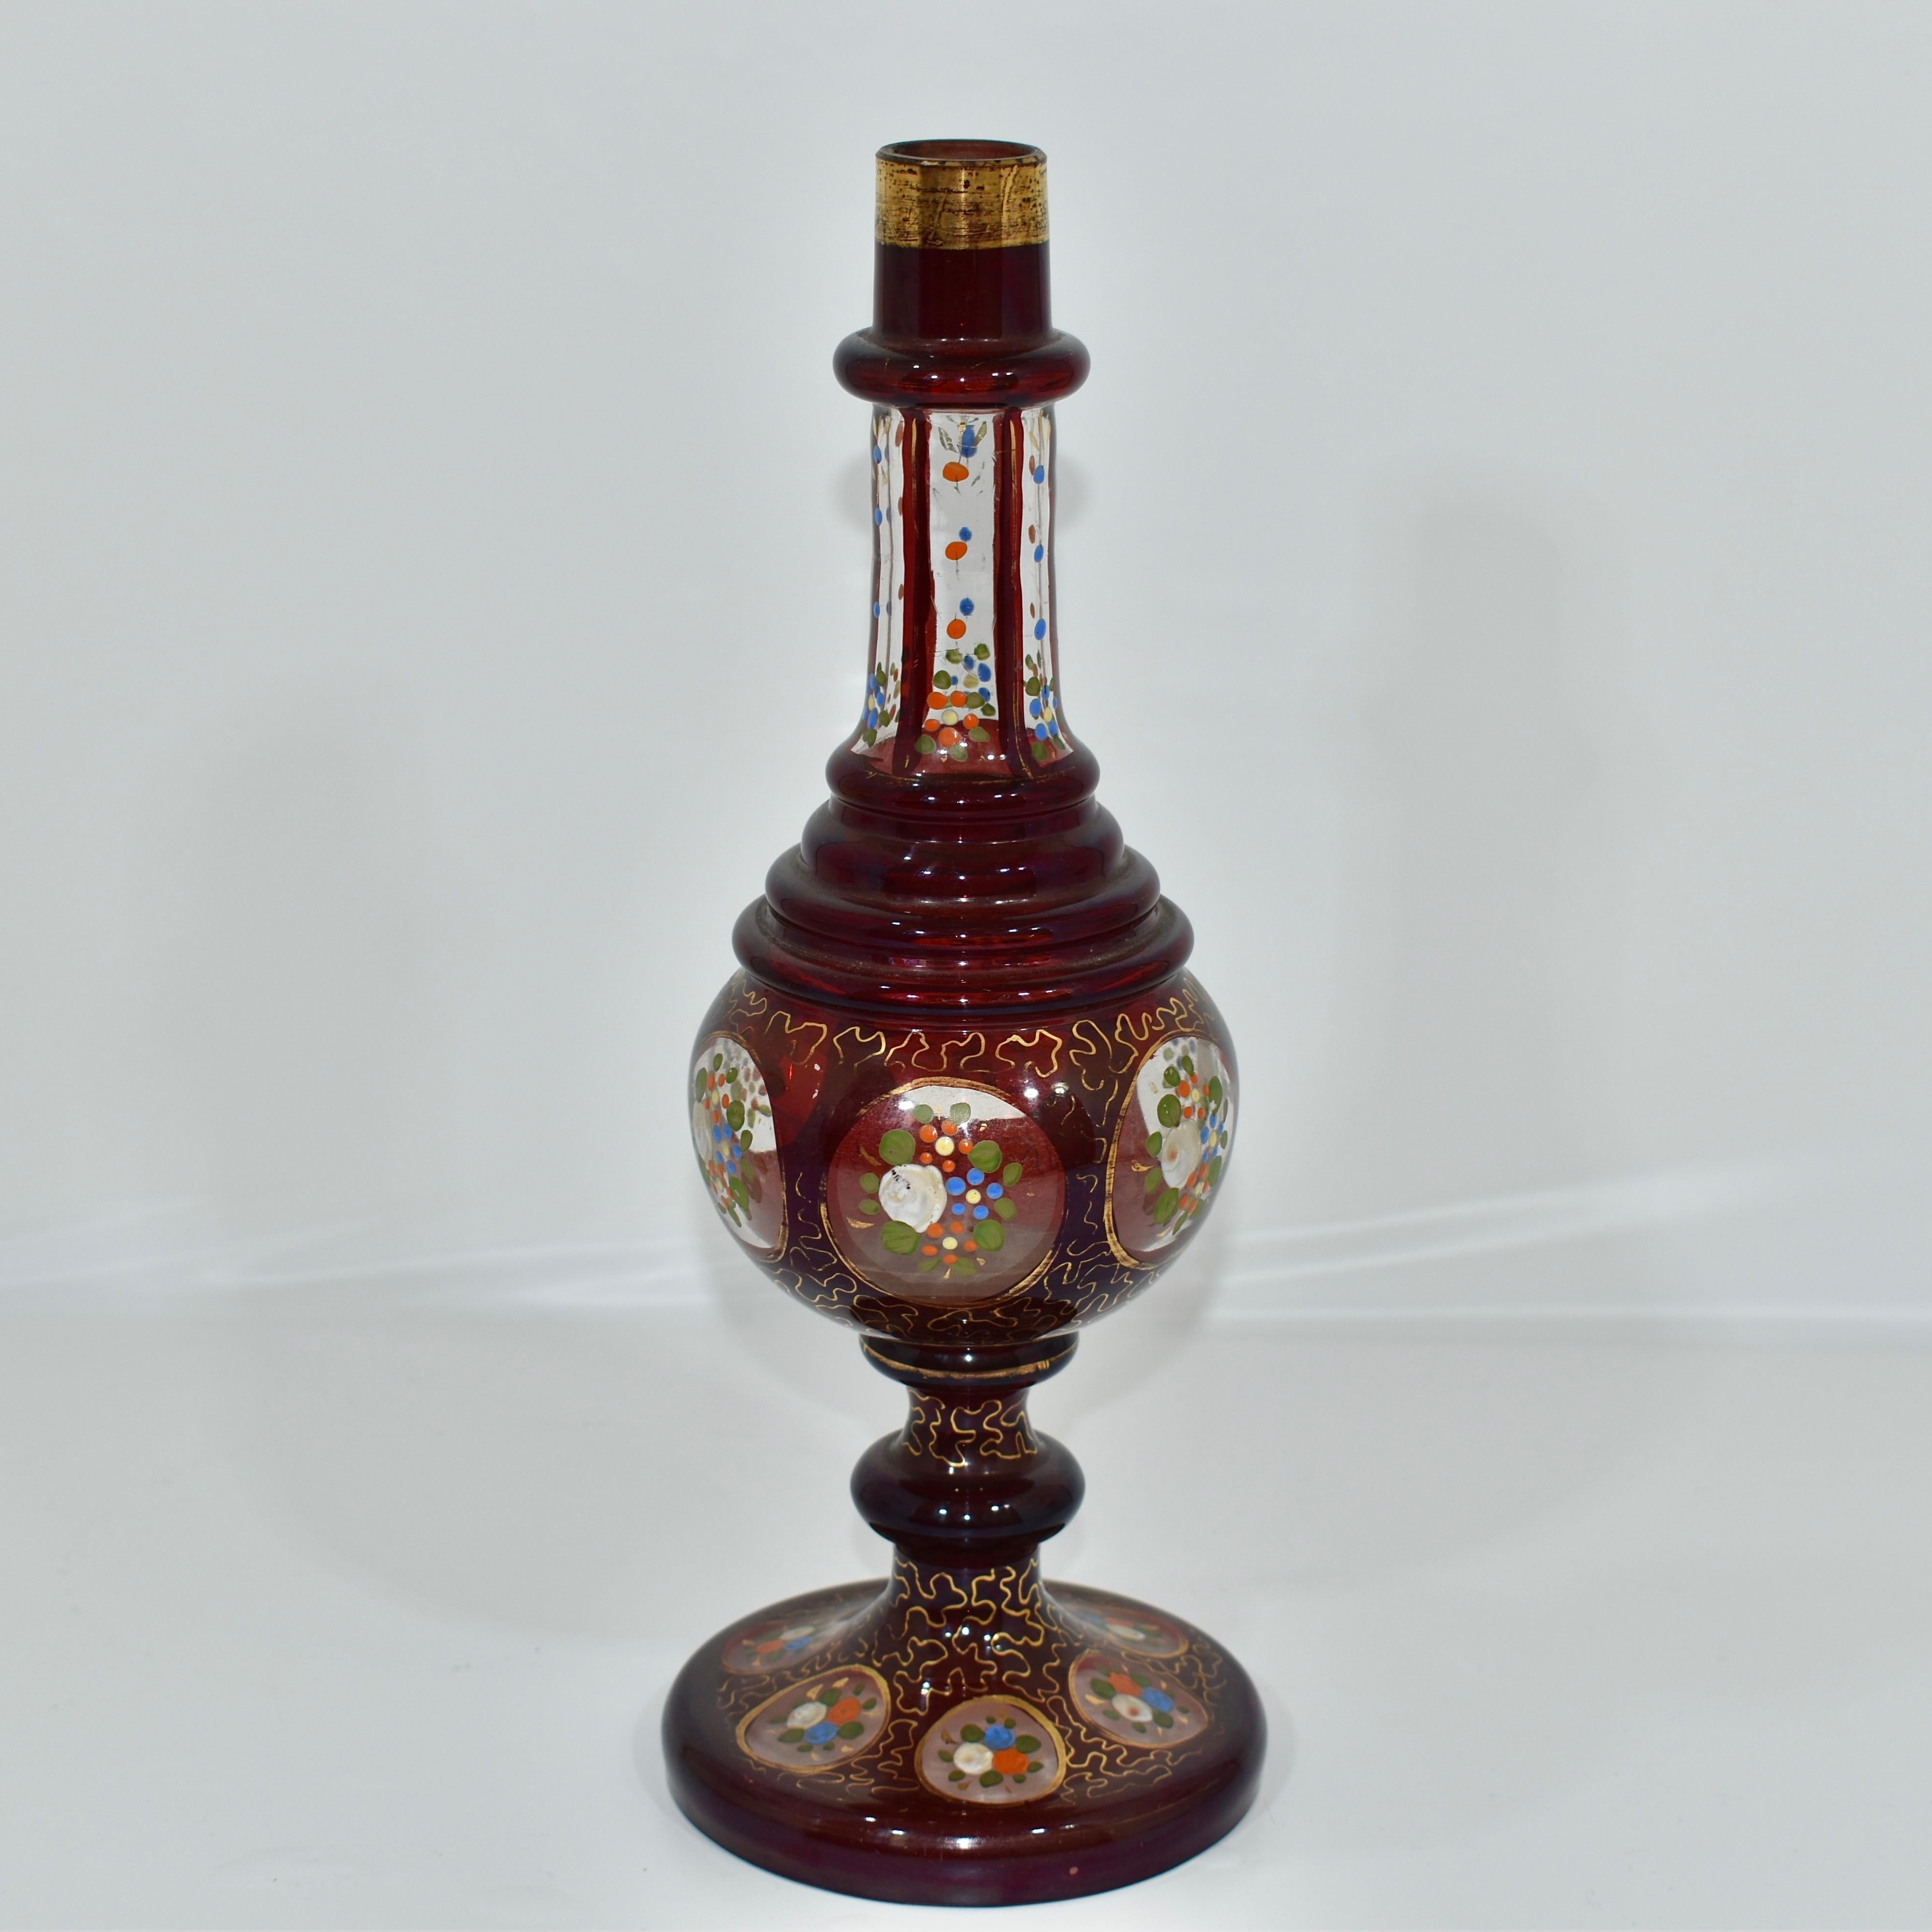 Antique Clear and Ruby Glass Rose Water Sprinkler

Decorated with colorful enamel and gilding highlights

Fine example of high quality Bohemian glass made for the Islamic market in the 19th century